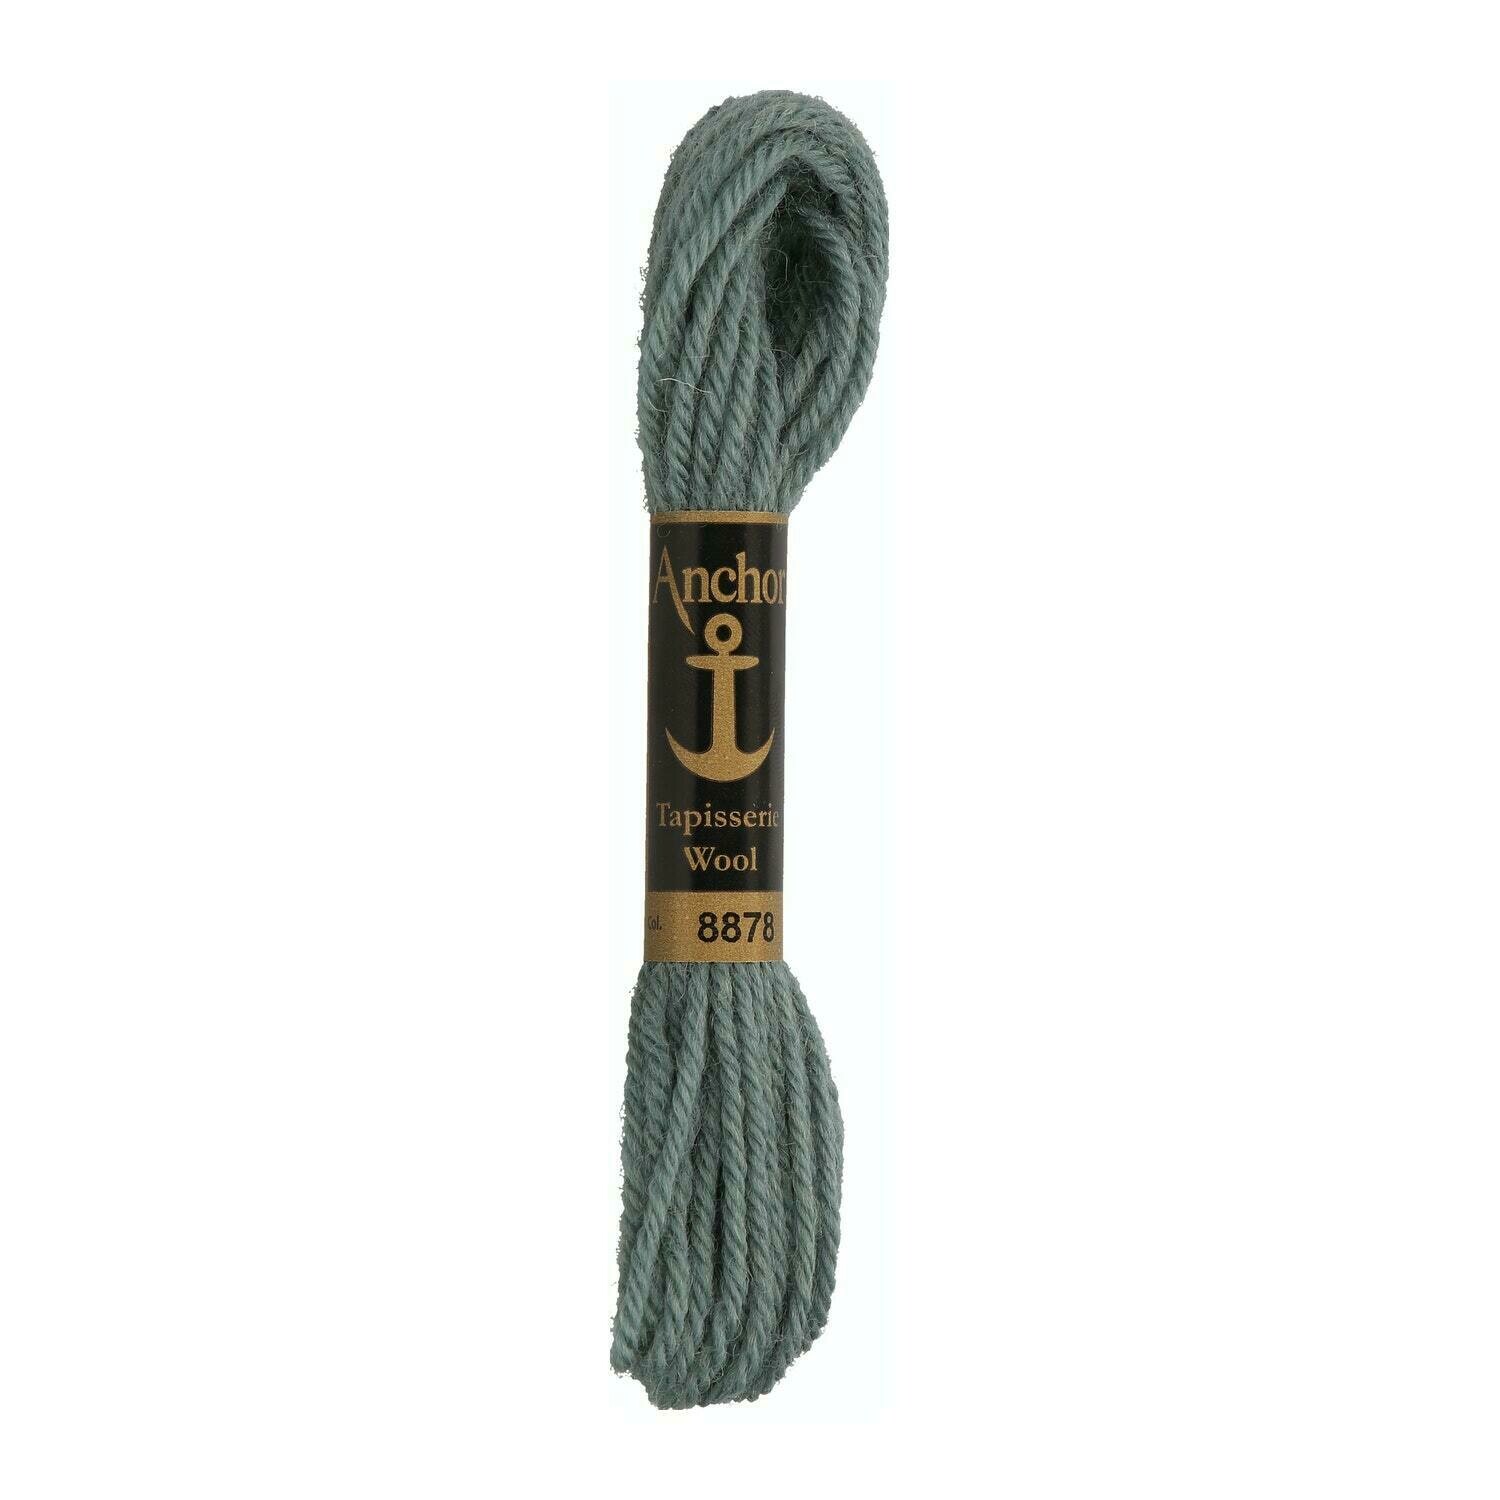 Anchor Tapisserie Wool #08878